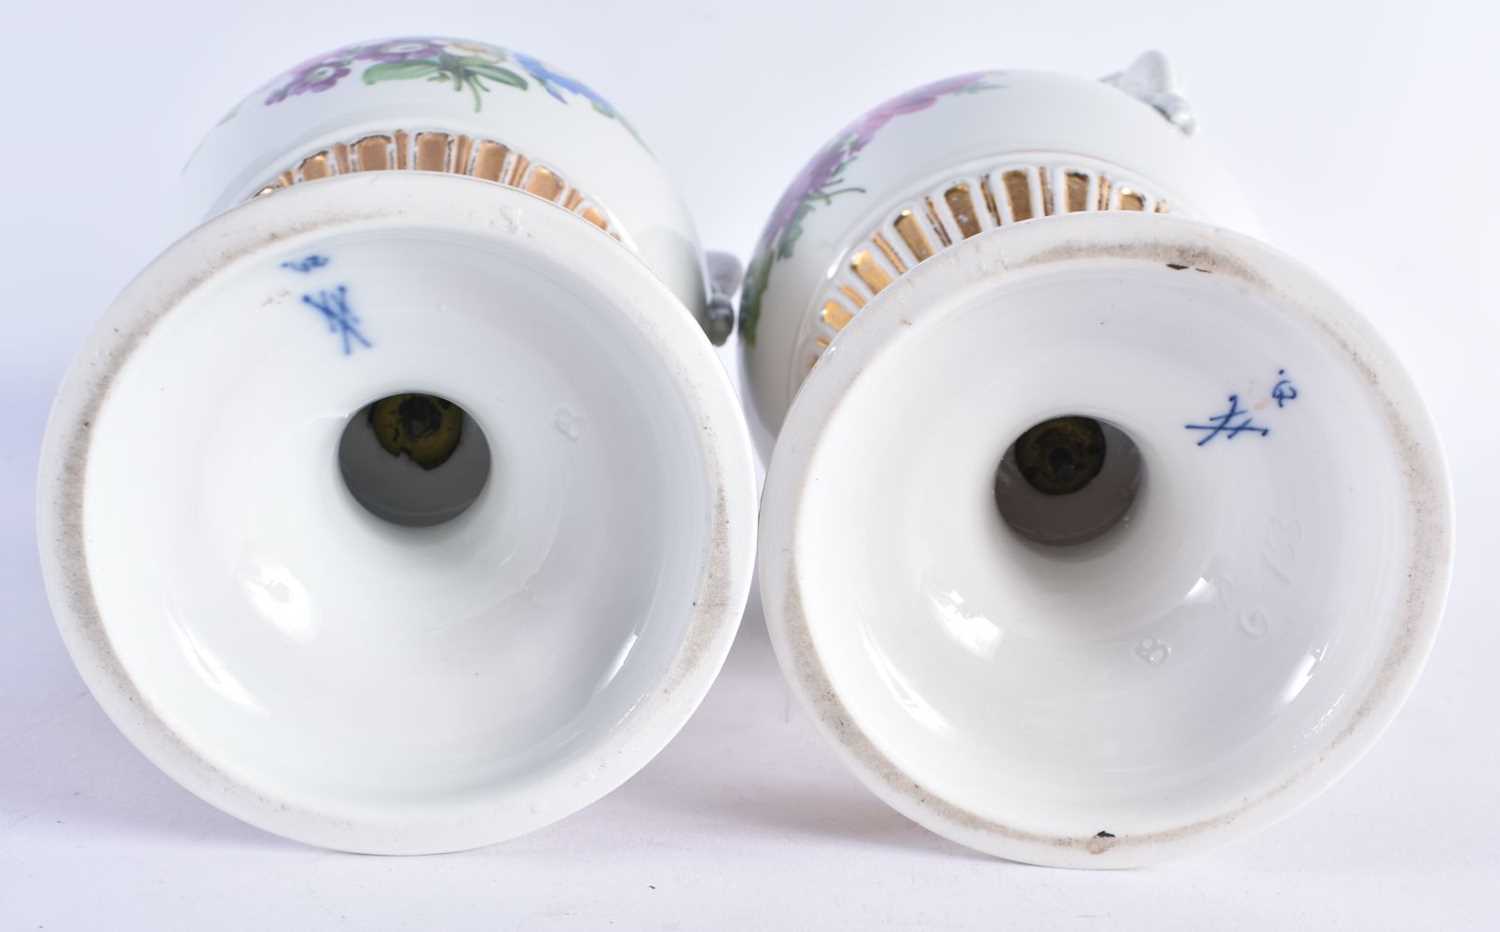 A LARGE PAIR OF EARLY 20TH CENTURY GERMAN TWIN HANDLED MEISSEN PORCELAIN VASES painted with floral - Bild 5 aus 9